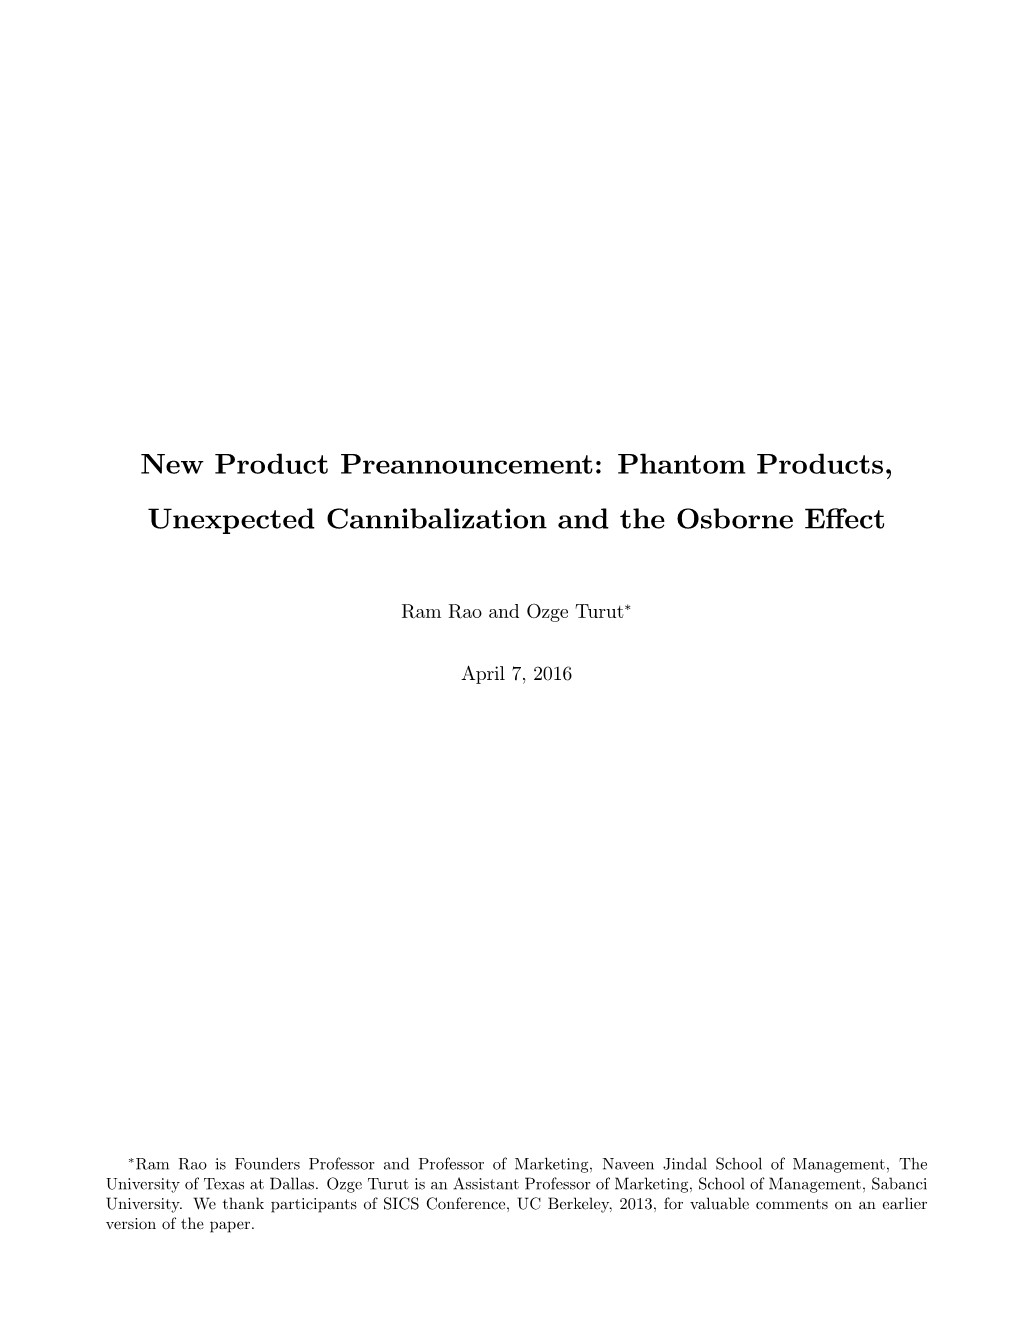 New Product Preannouncement: Phantom Products, Unexpected Cannibalization and the Osborne Eﬀect